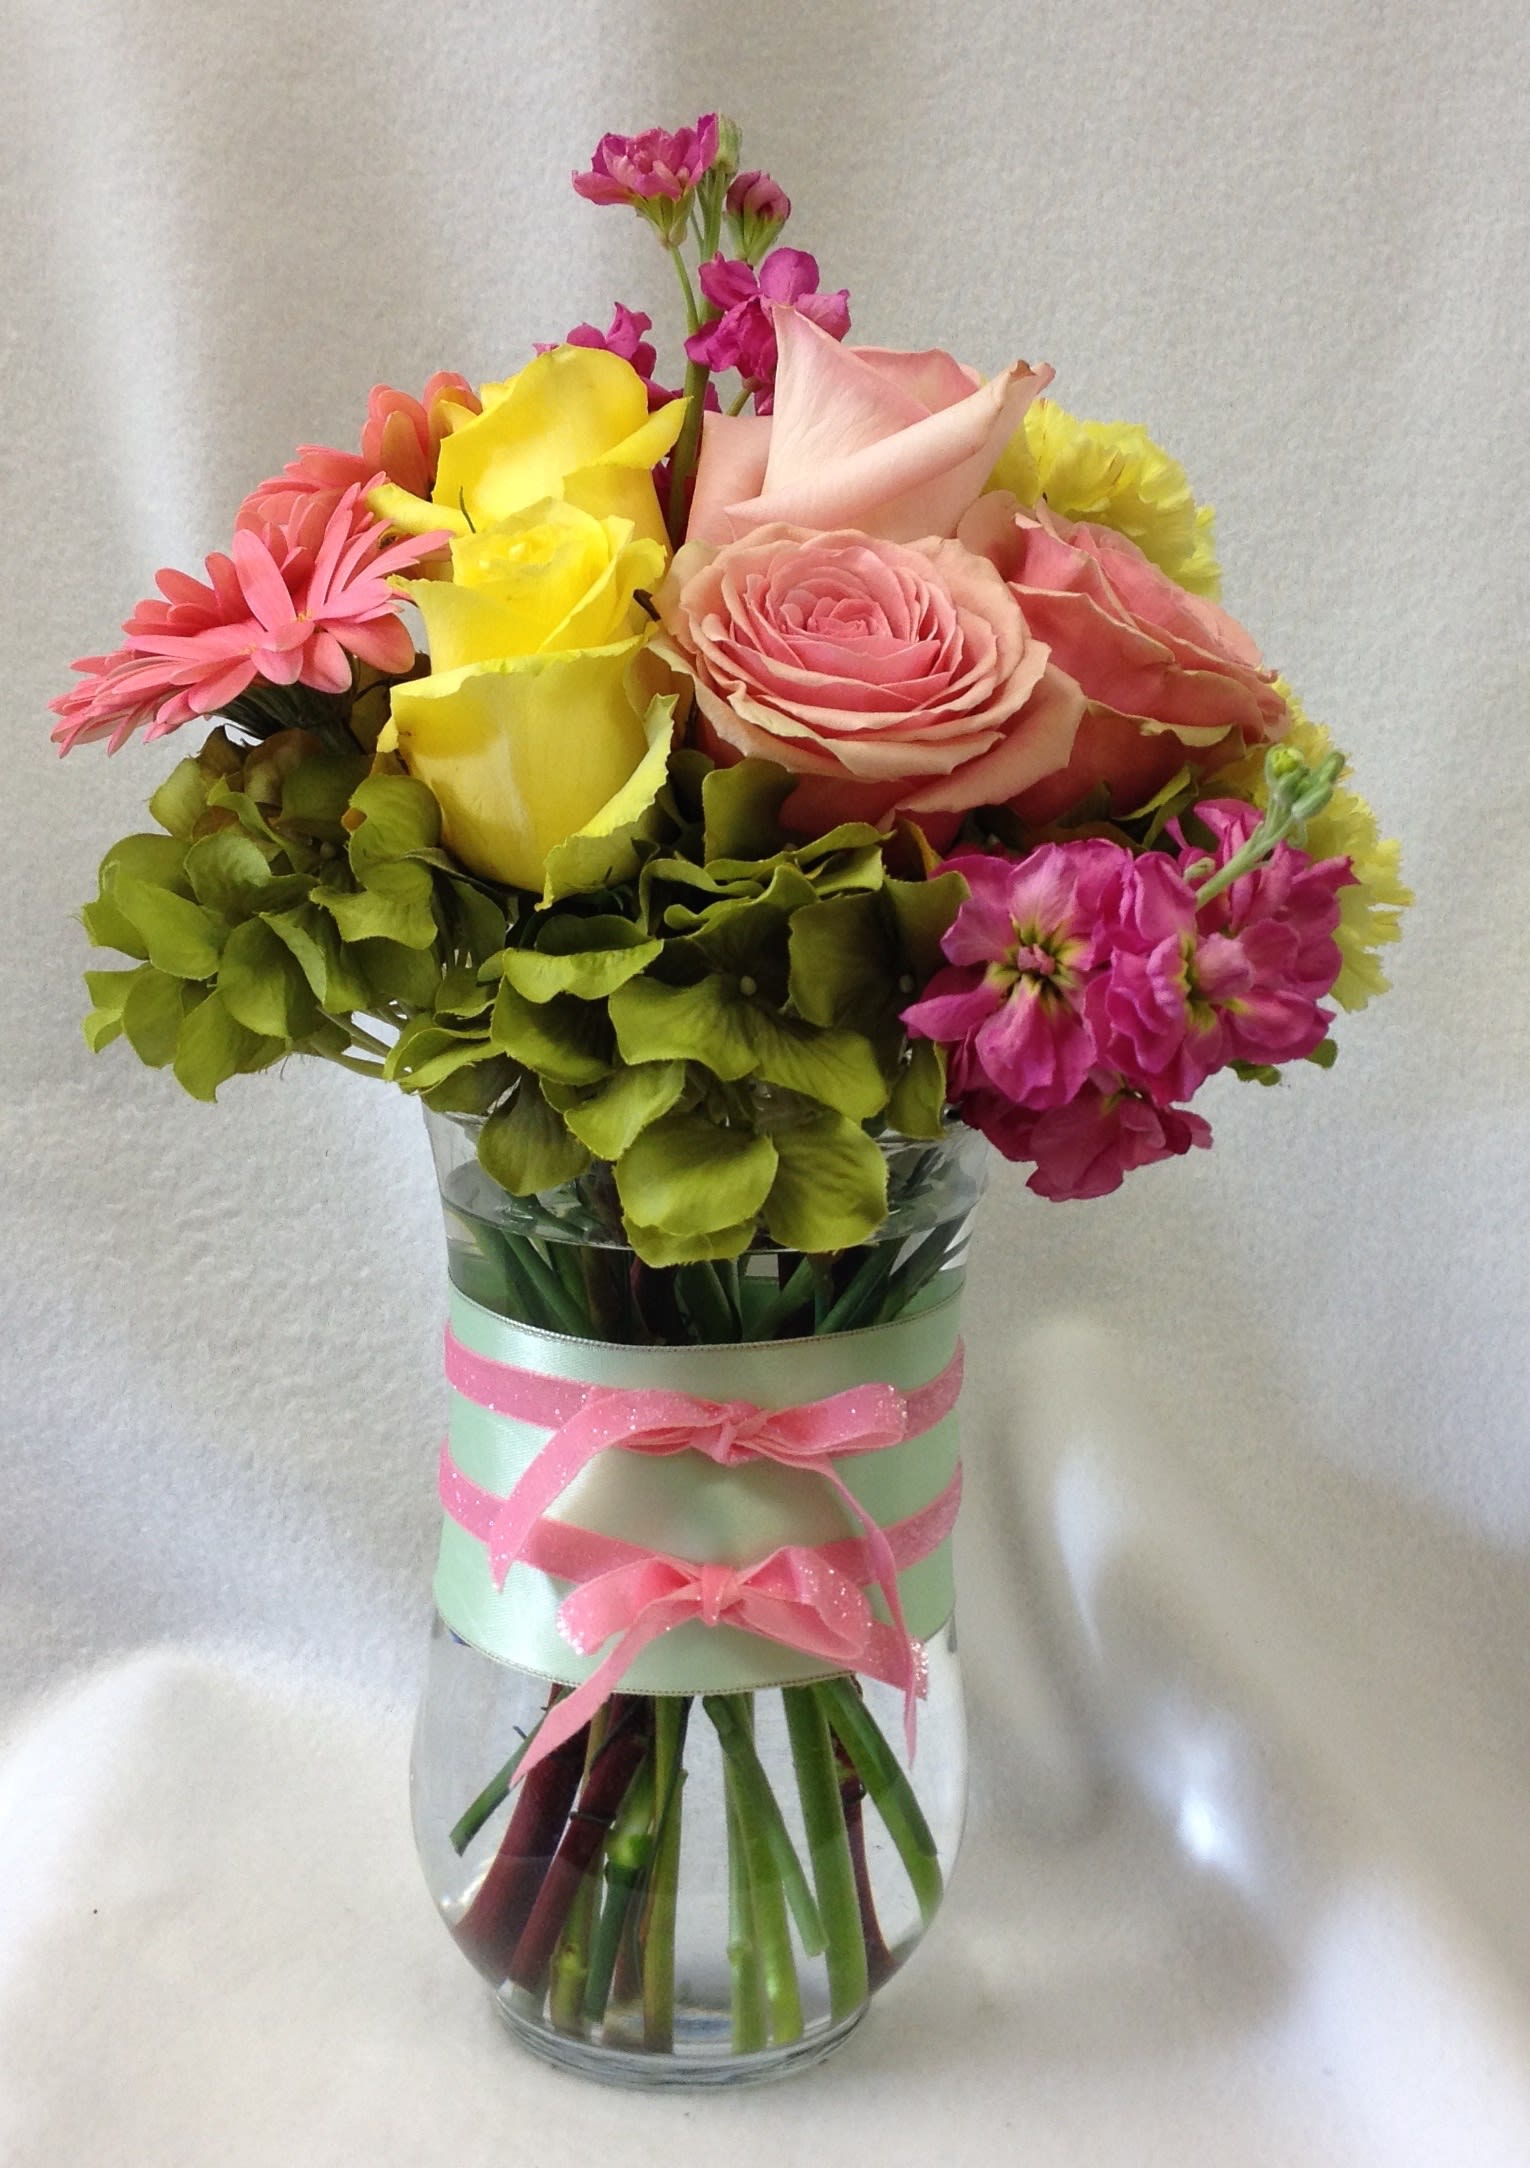 Fashionista Blossoms - This arrangement would be perfect for any girl with an eye for style. It's a must-have for fashionistas everywhere. Gorgeous hydrangea, yellow and light pink roses, gerberas, light yellow carnations and green button spray chrysanthemums are delivered in a pretty gathering vase. Not just any vase, of course, this one's accessorized with a decorative ribbon.  Flowers may vary depending on availability. Orientation: All-Around